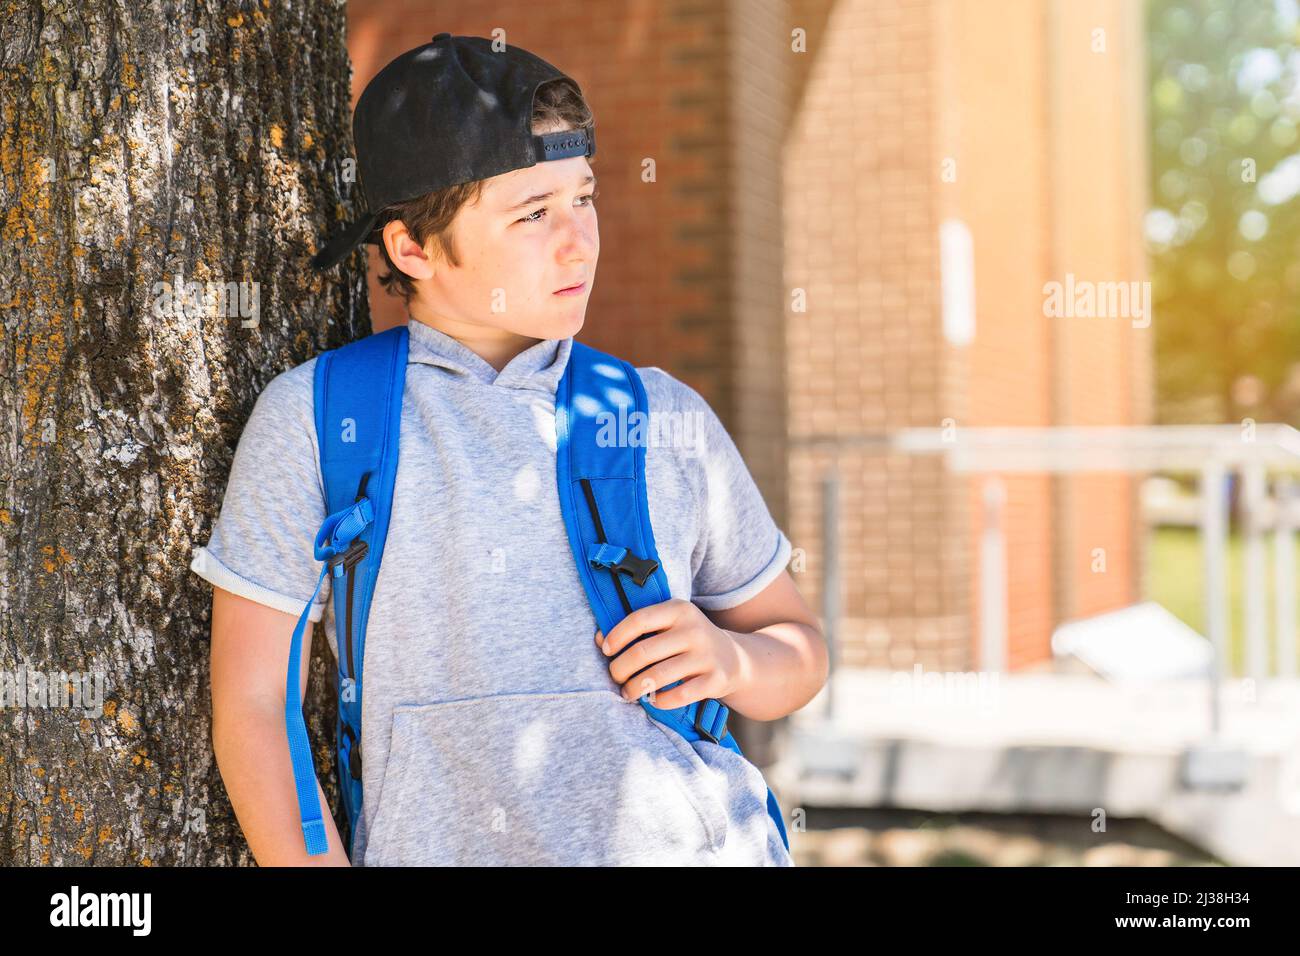 Young children boy on the school playground with backpack Stock Photo